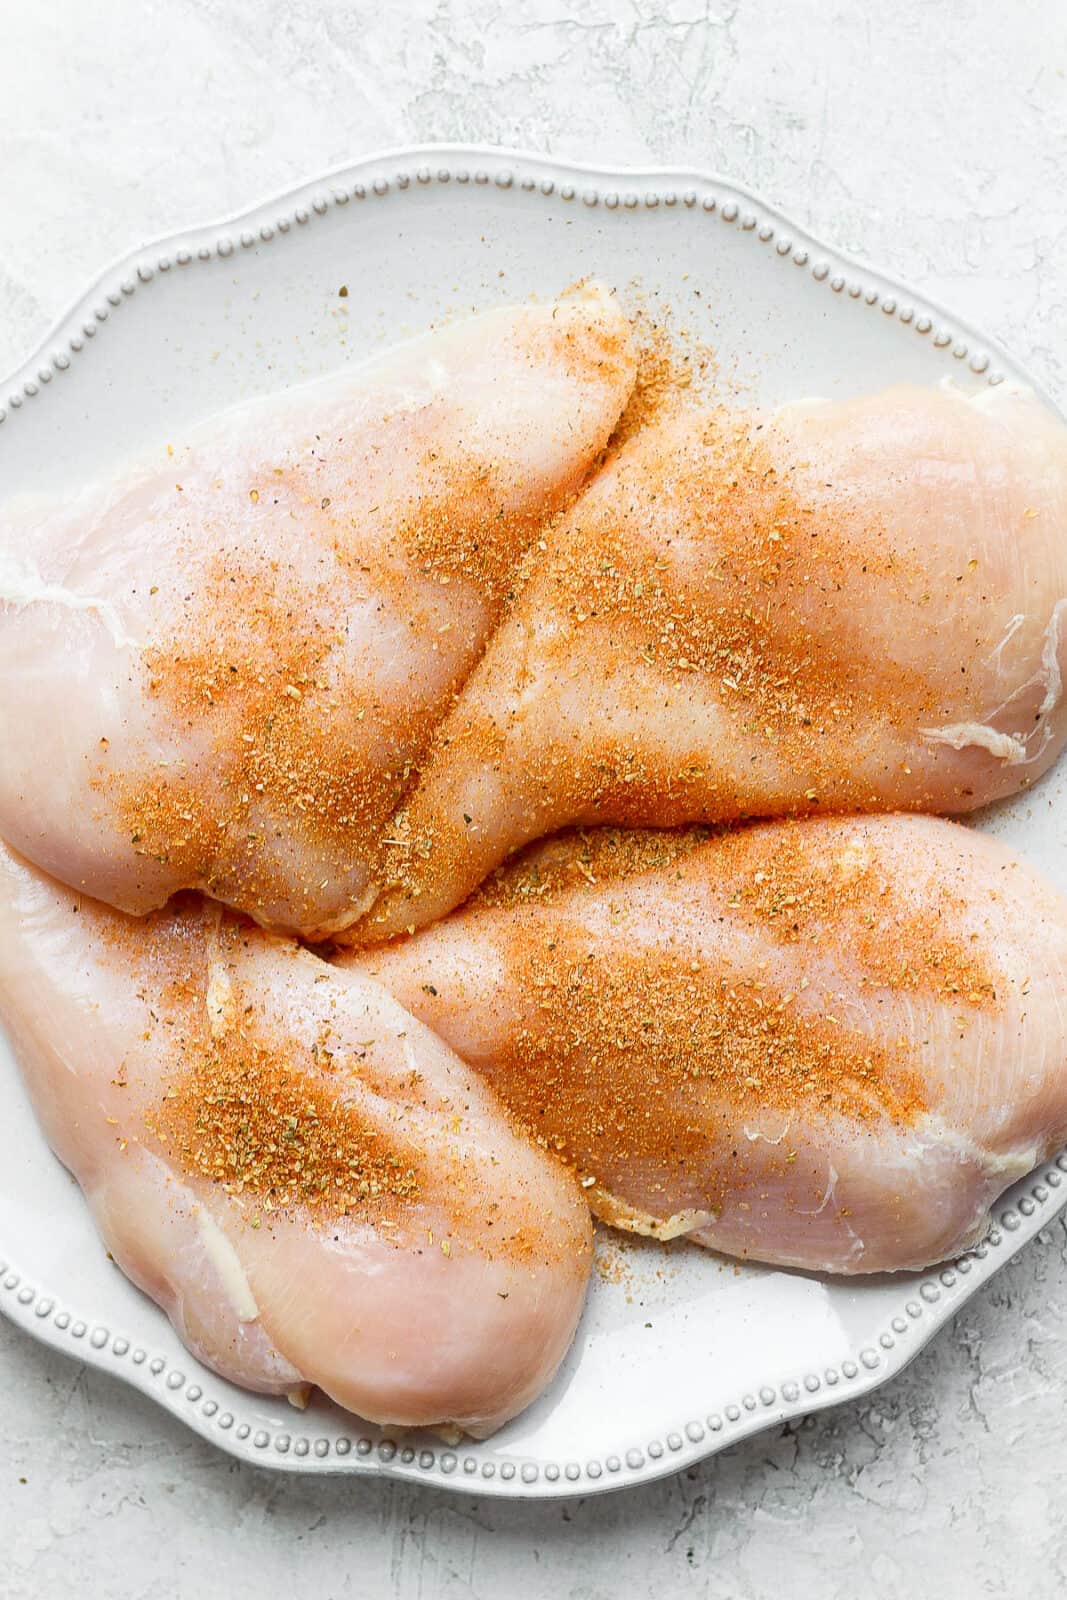 Raw chicken breasts with dry rub sprinkled on top.